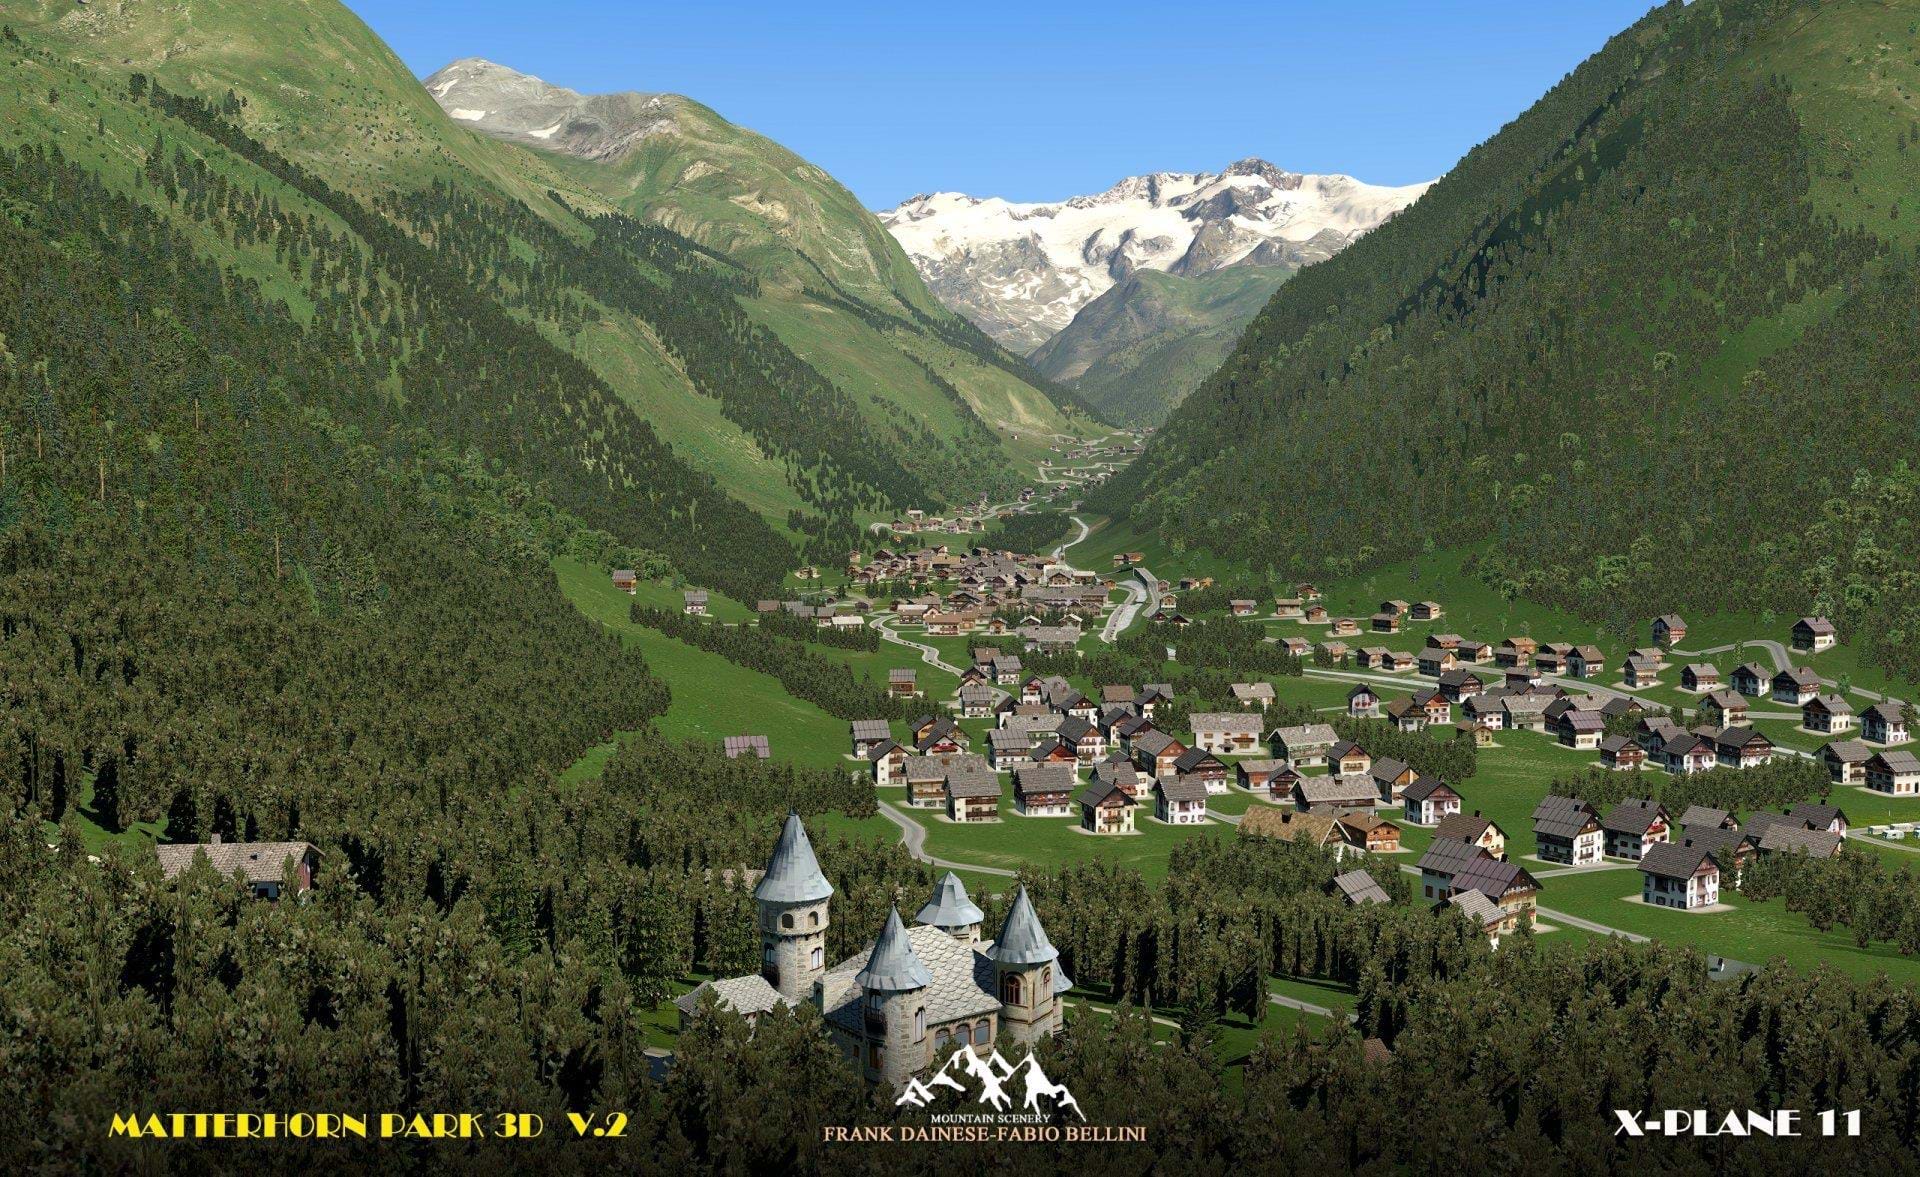 Frank Dainese and Fabio Bellini Val D’Aosta North/South + Matterhorn Park 2.0 for X-Plane